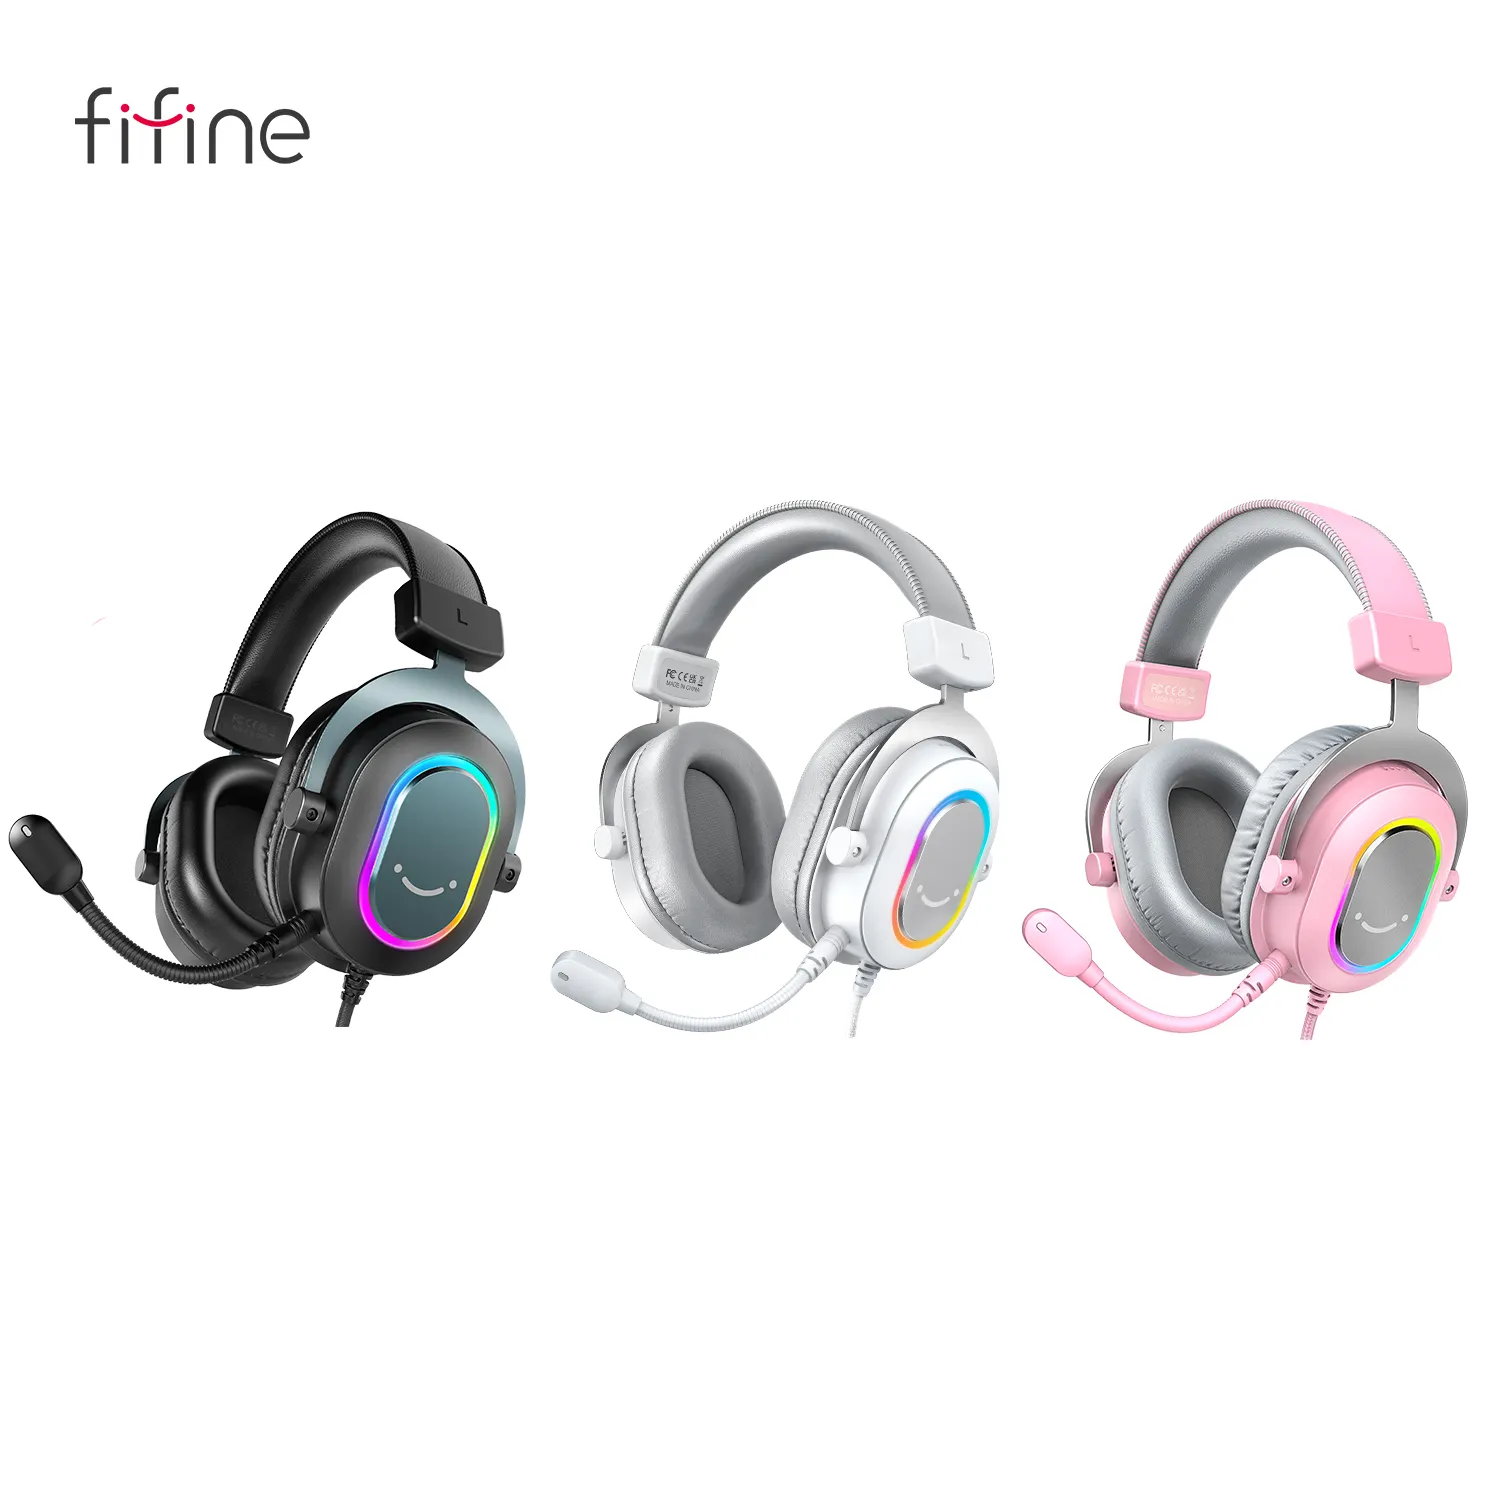 Fifine H6 High Quality Noise Cancelling 7.1 RGB Gaming Headset Studio Headphones Wired Gamer Headset USB Gaming Headphones